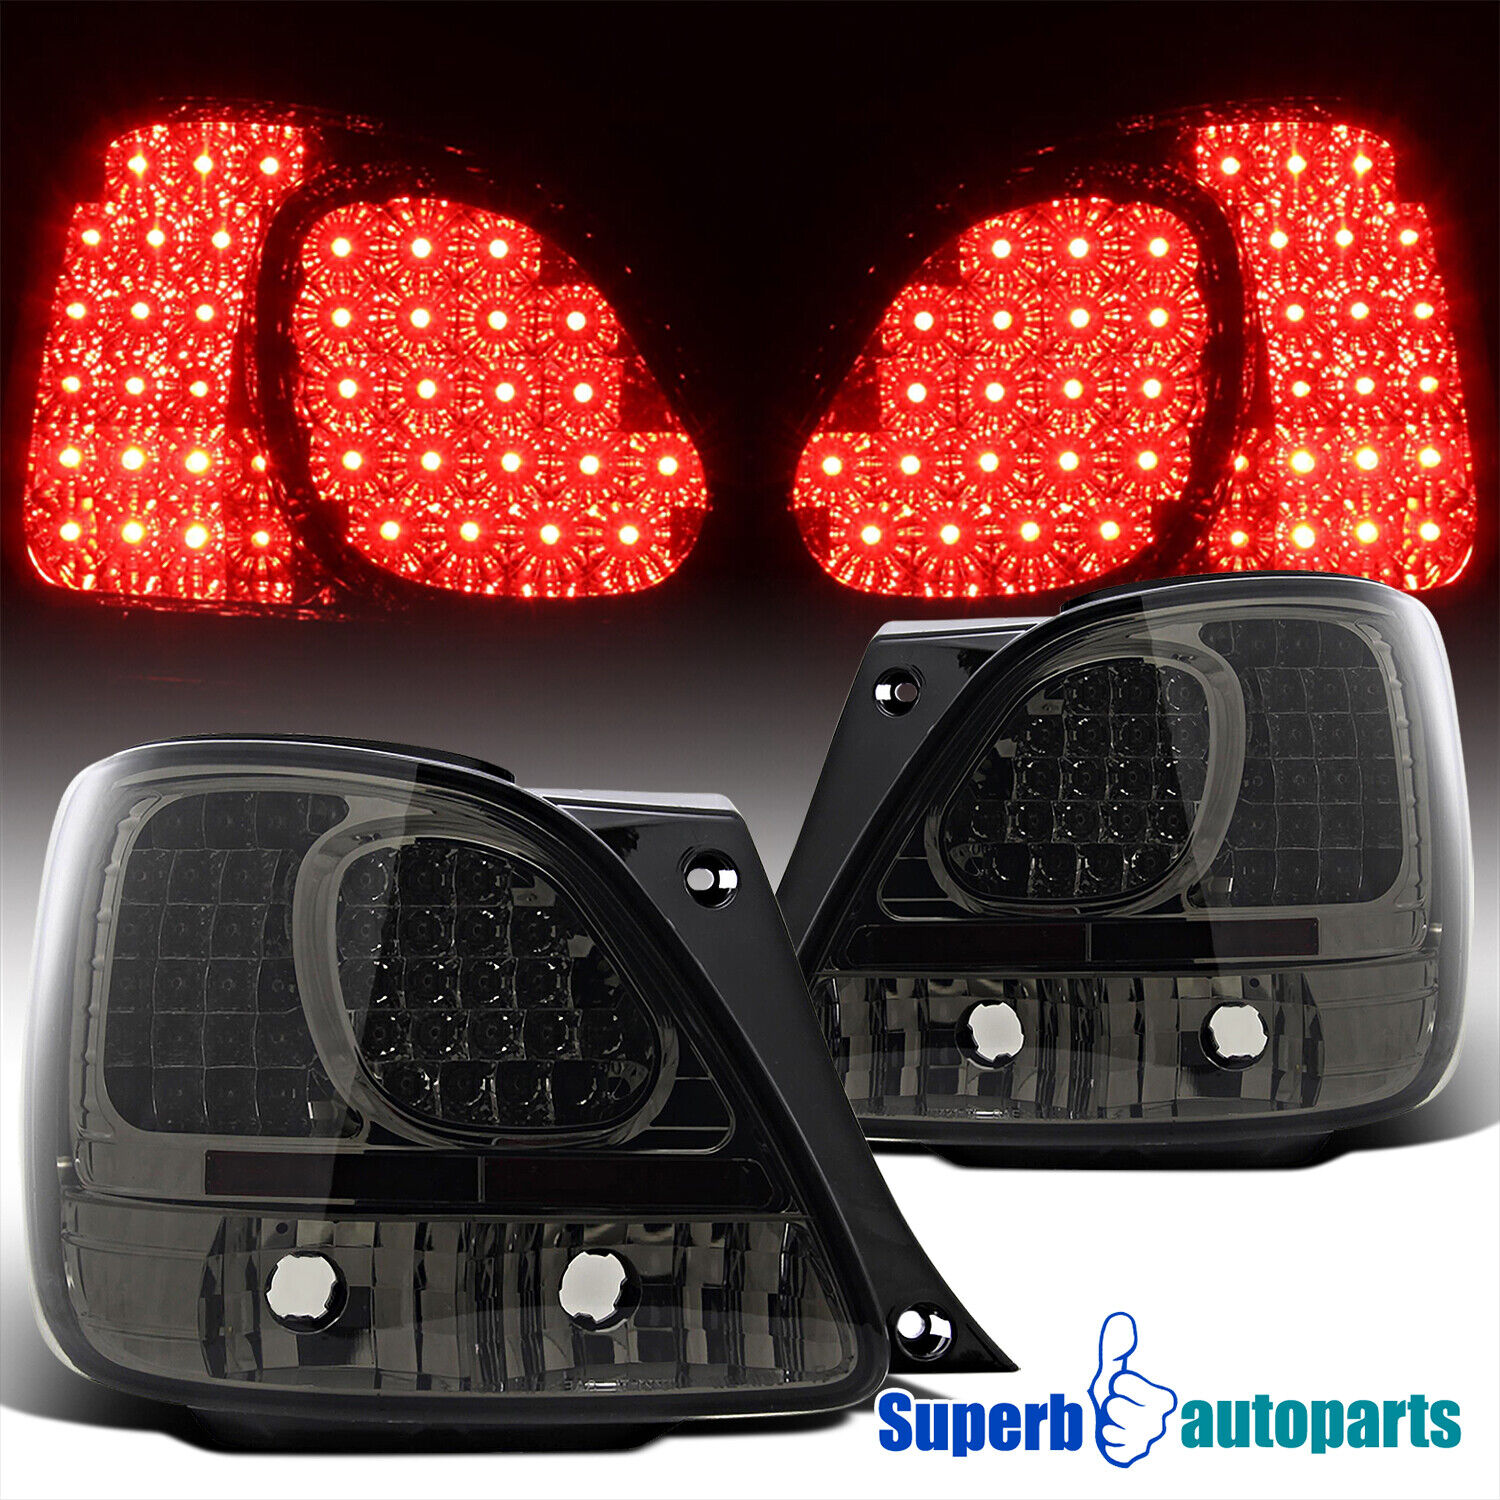 Fits 1998-2005 Lexus GS300 GS400 GS430 LED Tail Brake Lights Smoke Replacement